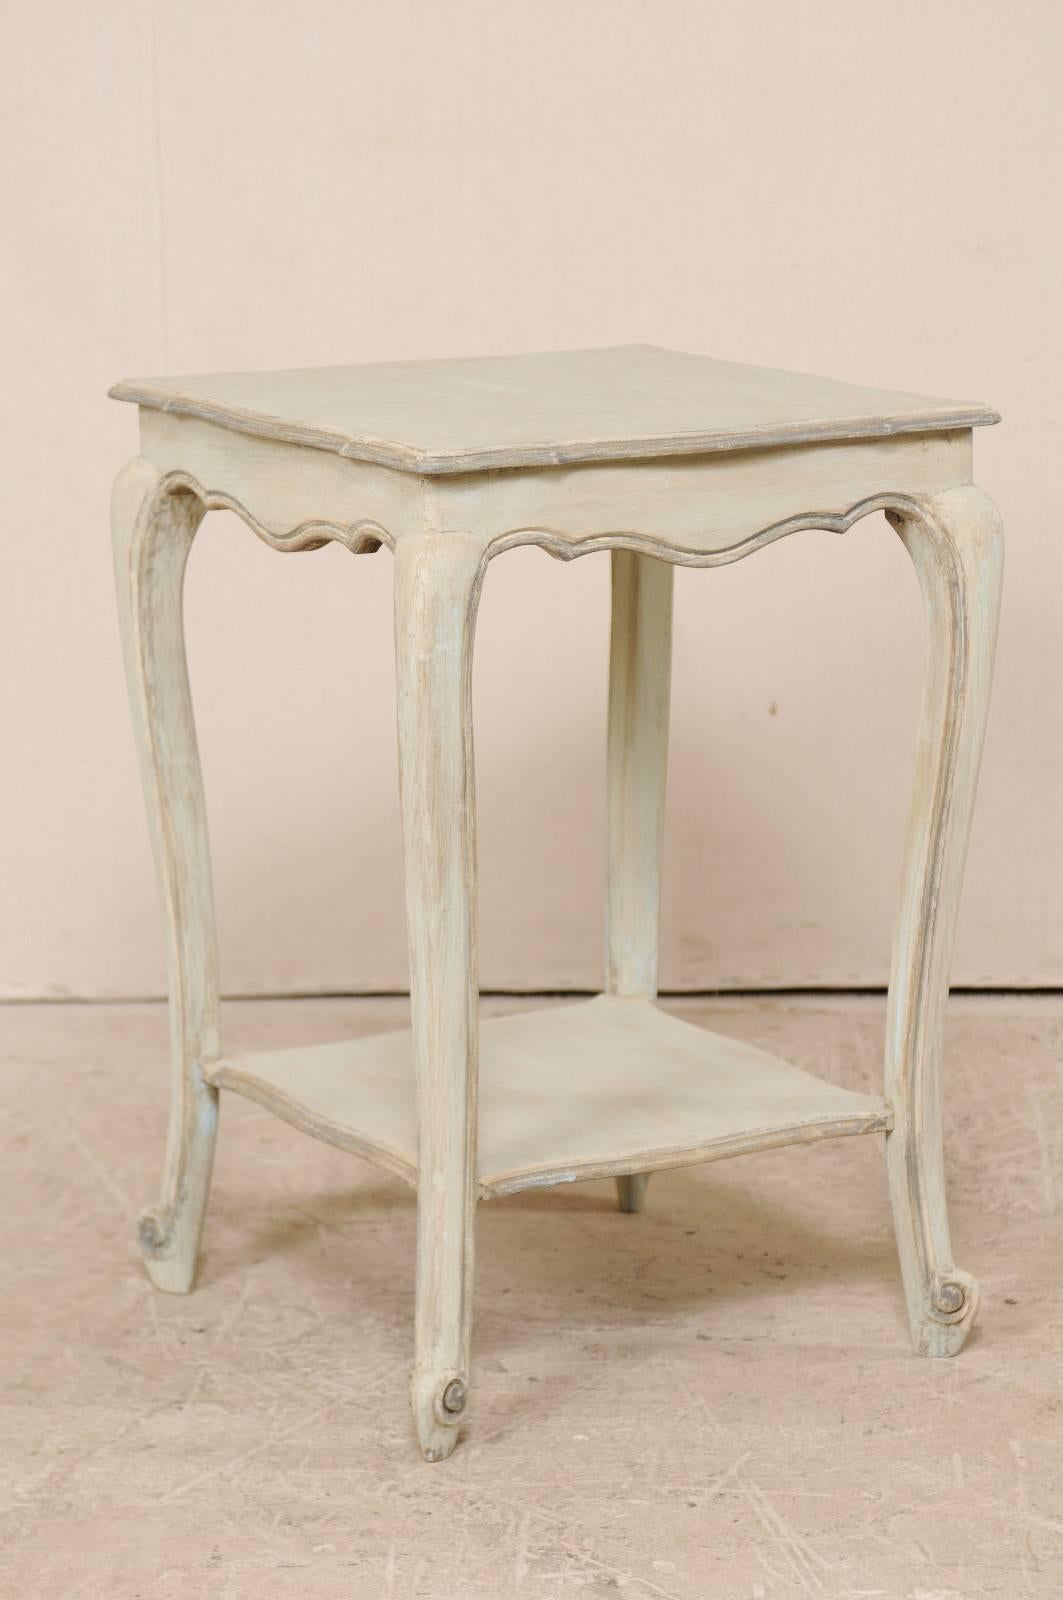 Carved Vintage French Early 20th Century Painted Wood Side Table in Soft Pale Blue-Grey